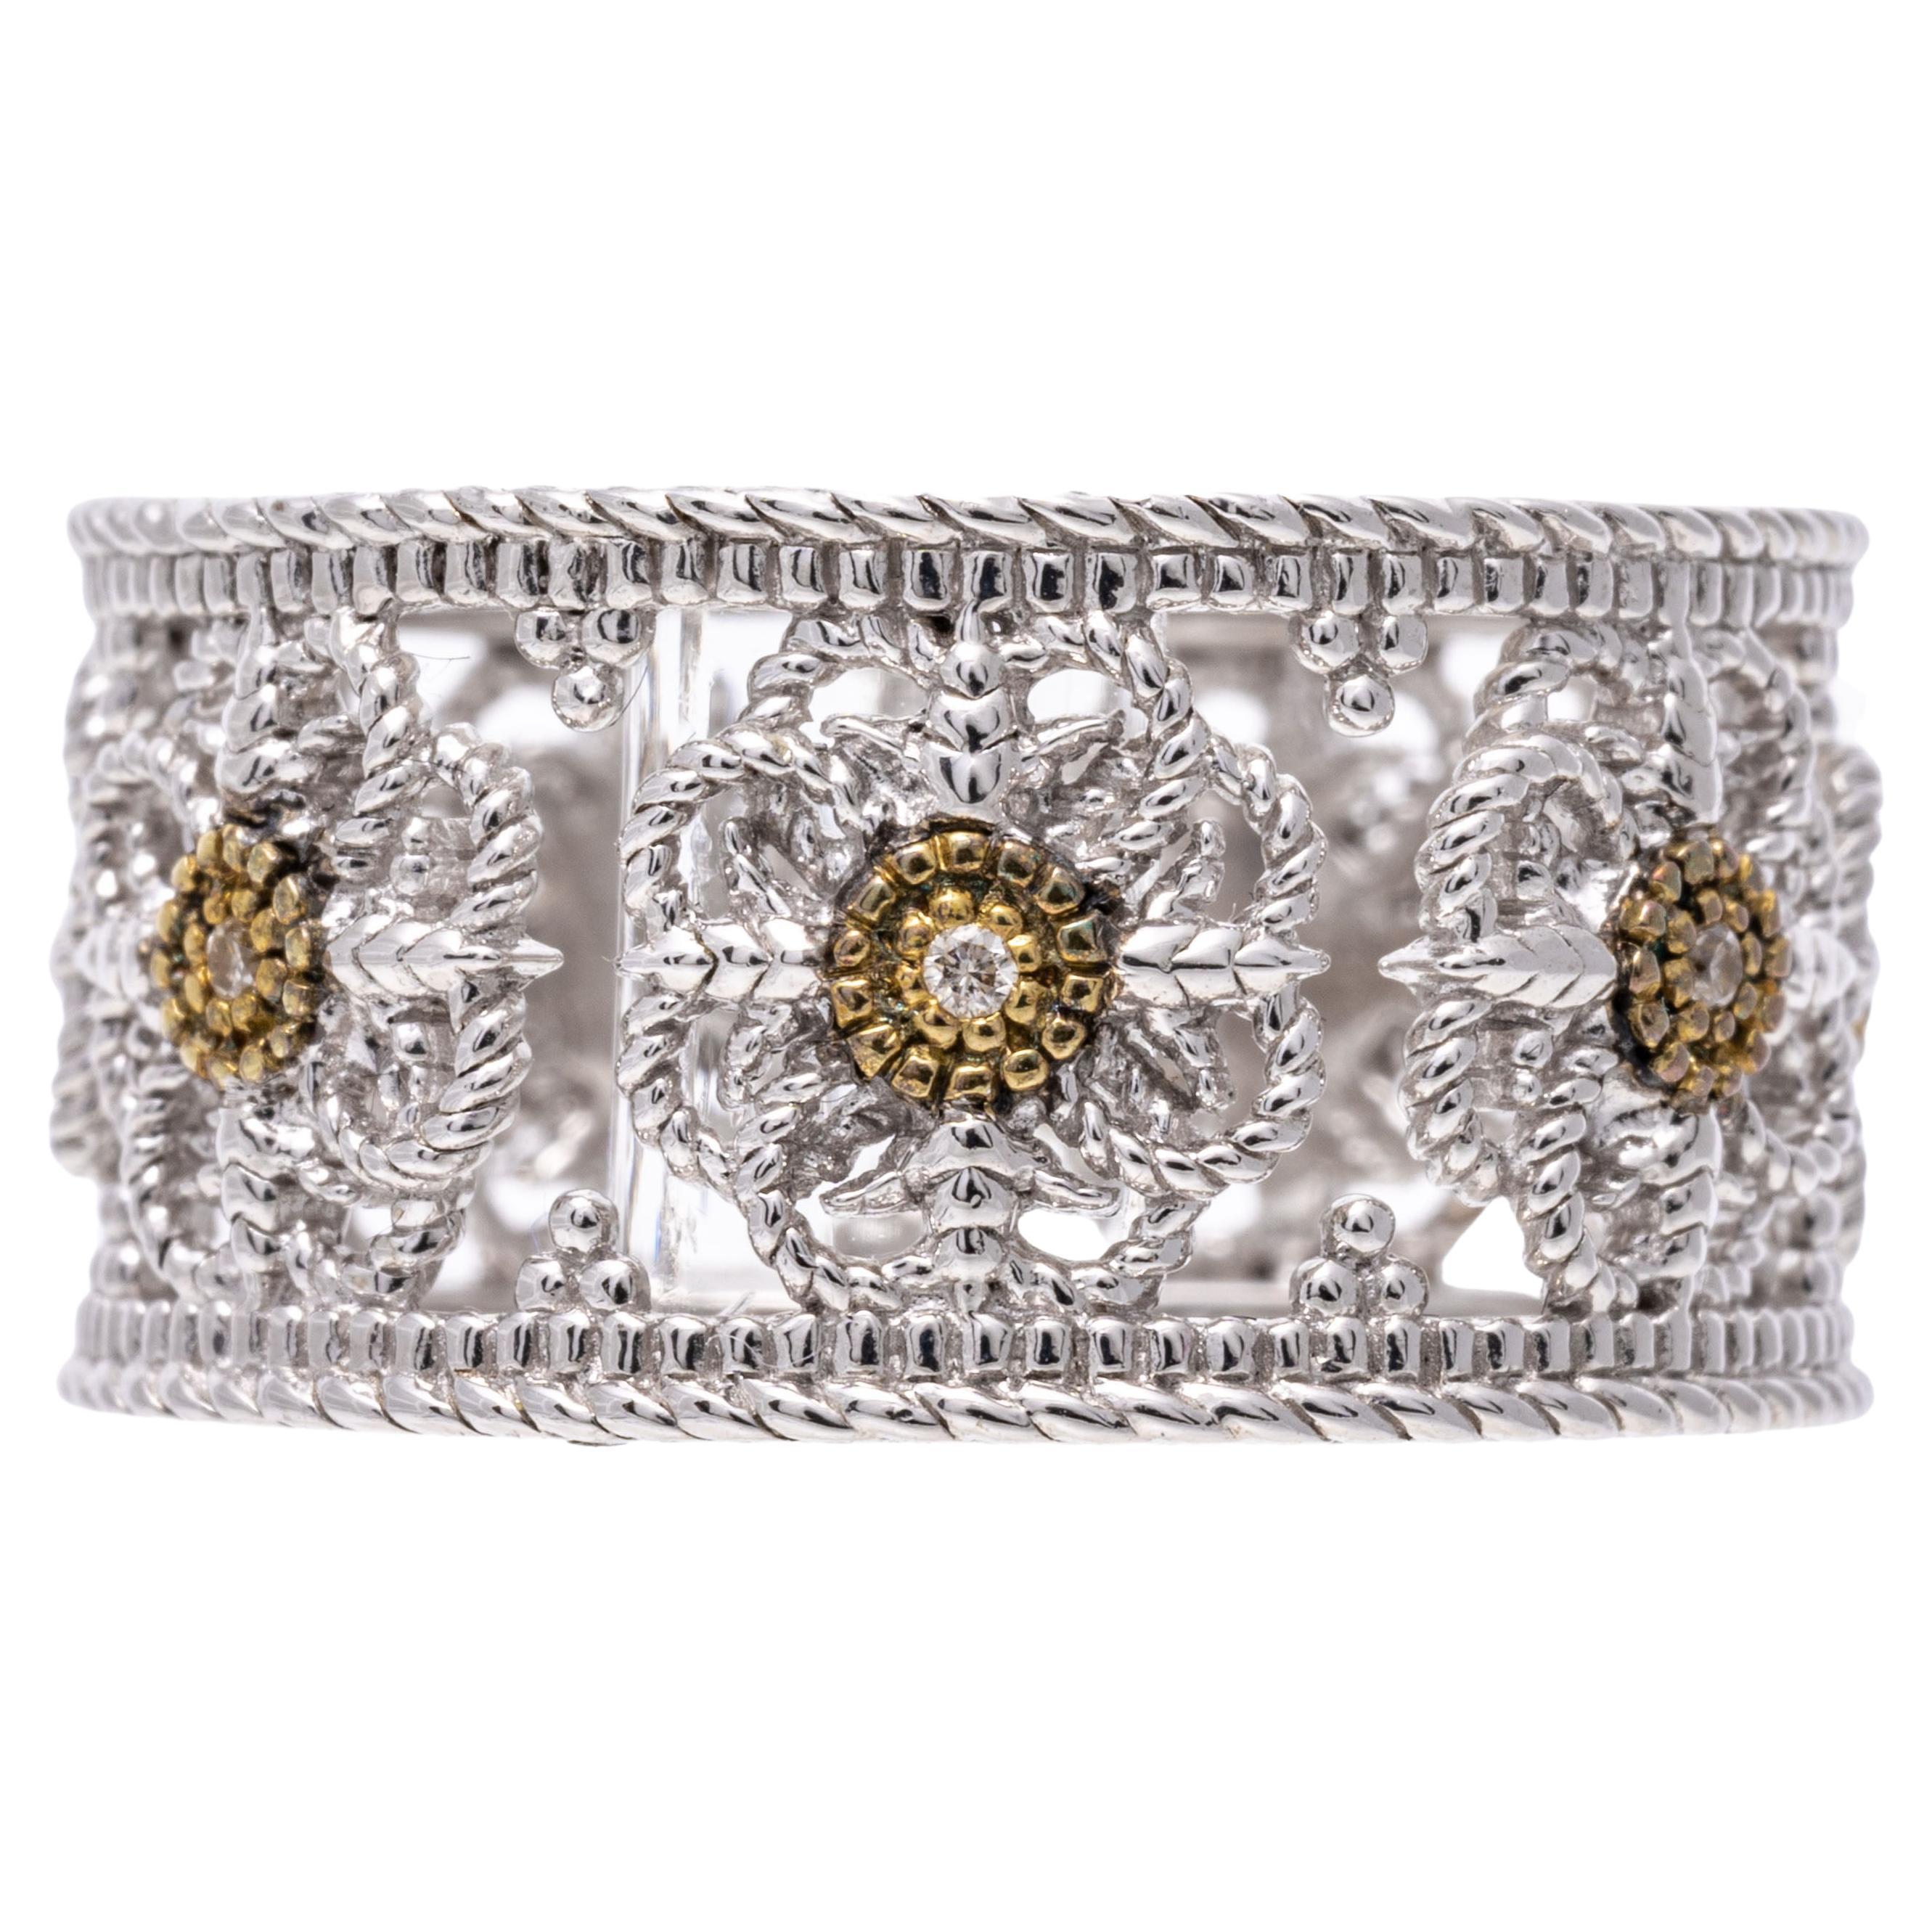 Sterling silver and yellow gold ring. This striking, ultra wide sterling silver eternity band ring has a repeating flower pattern decoration, set in the center with round faceted diamonds, approximately 0.02 TCW and trimmed in yellow gold. The ring